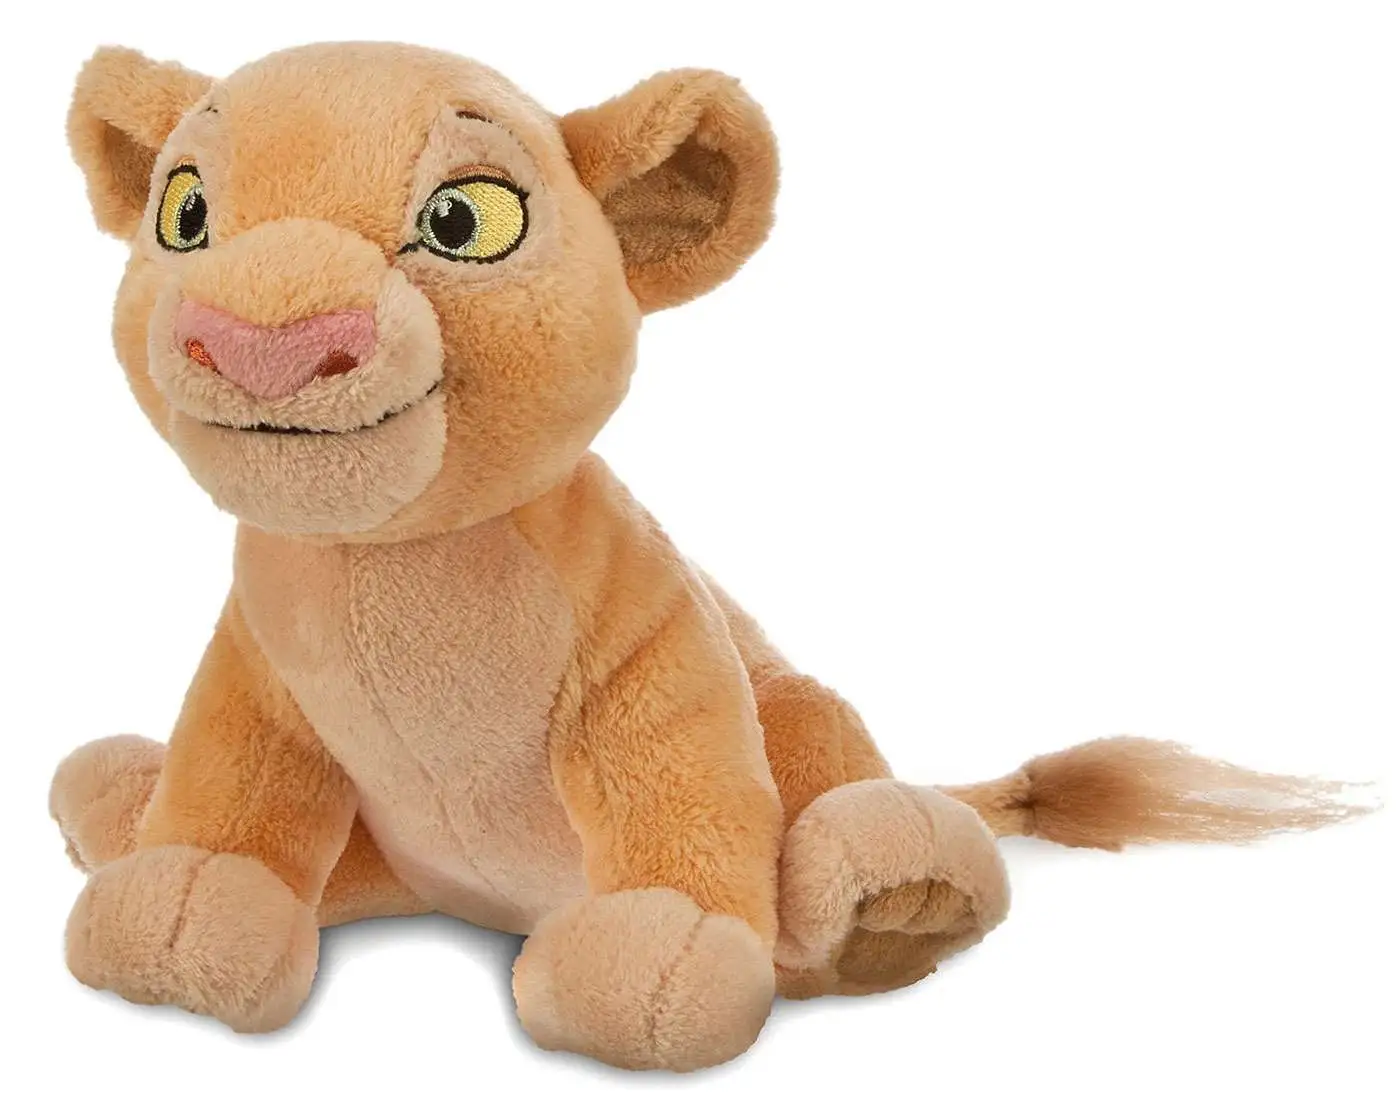 Details about   Disney's The Lion King Nala Plush Toy by Just Play 7" 2019 